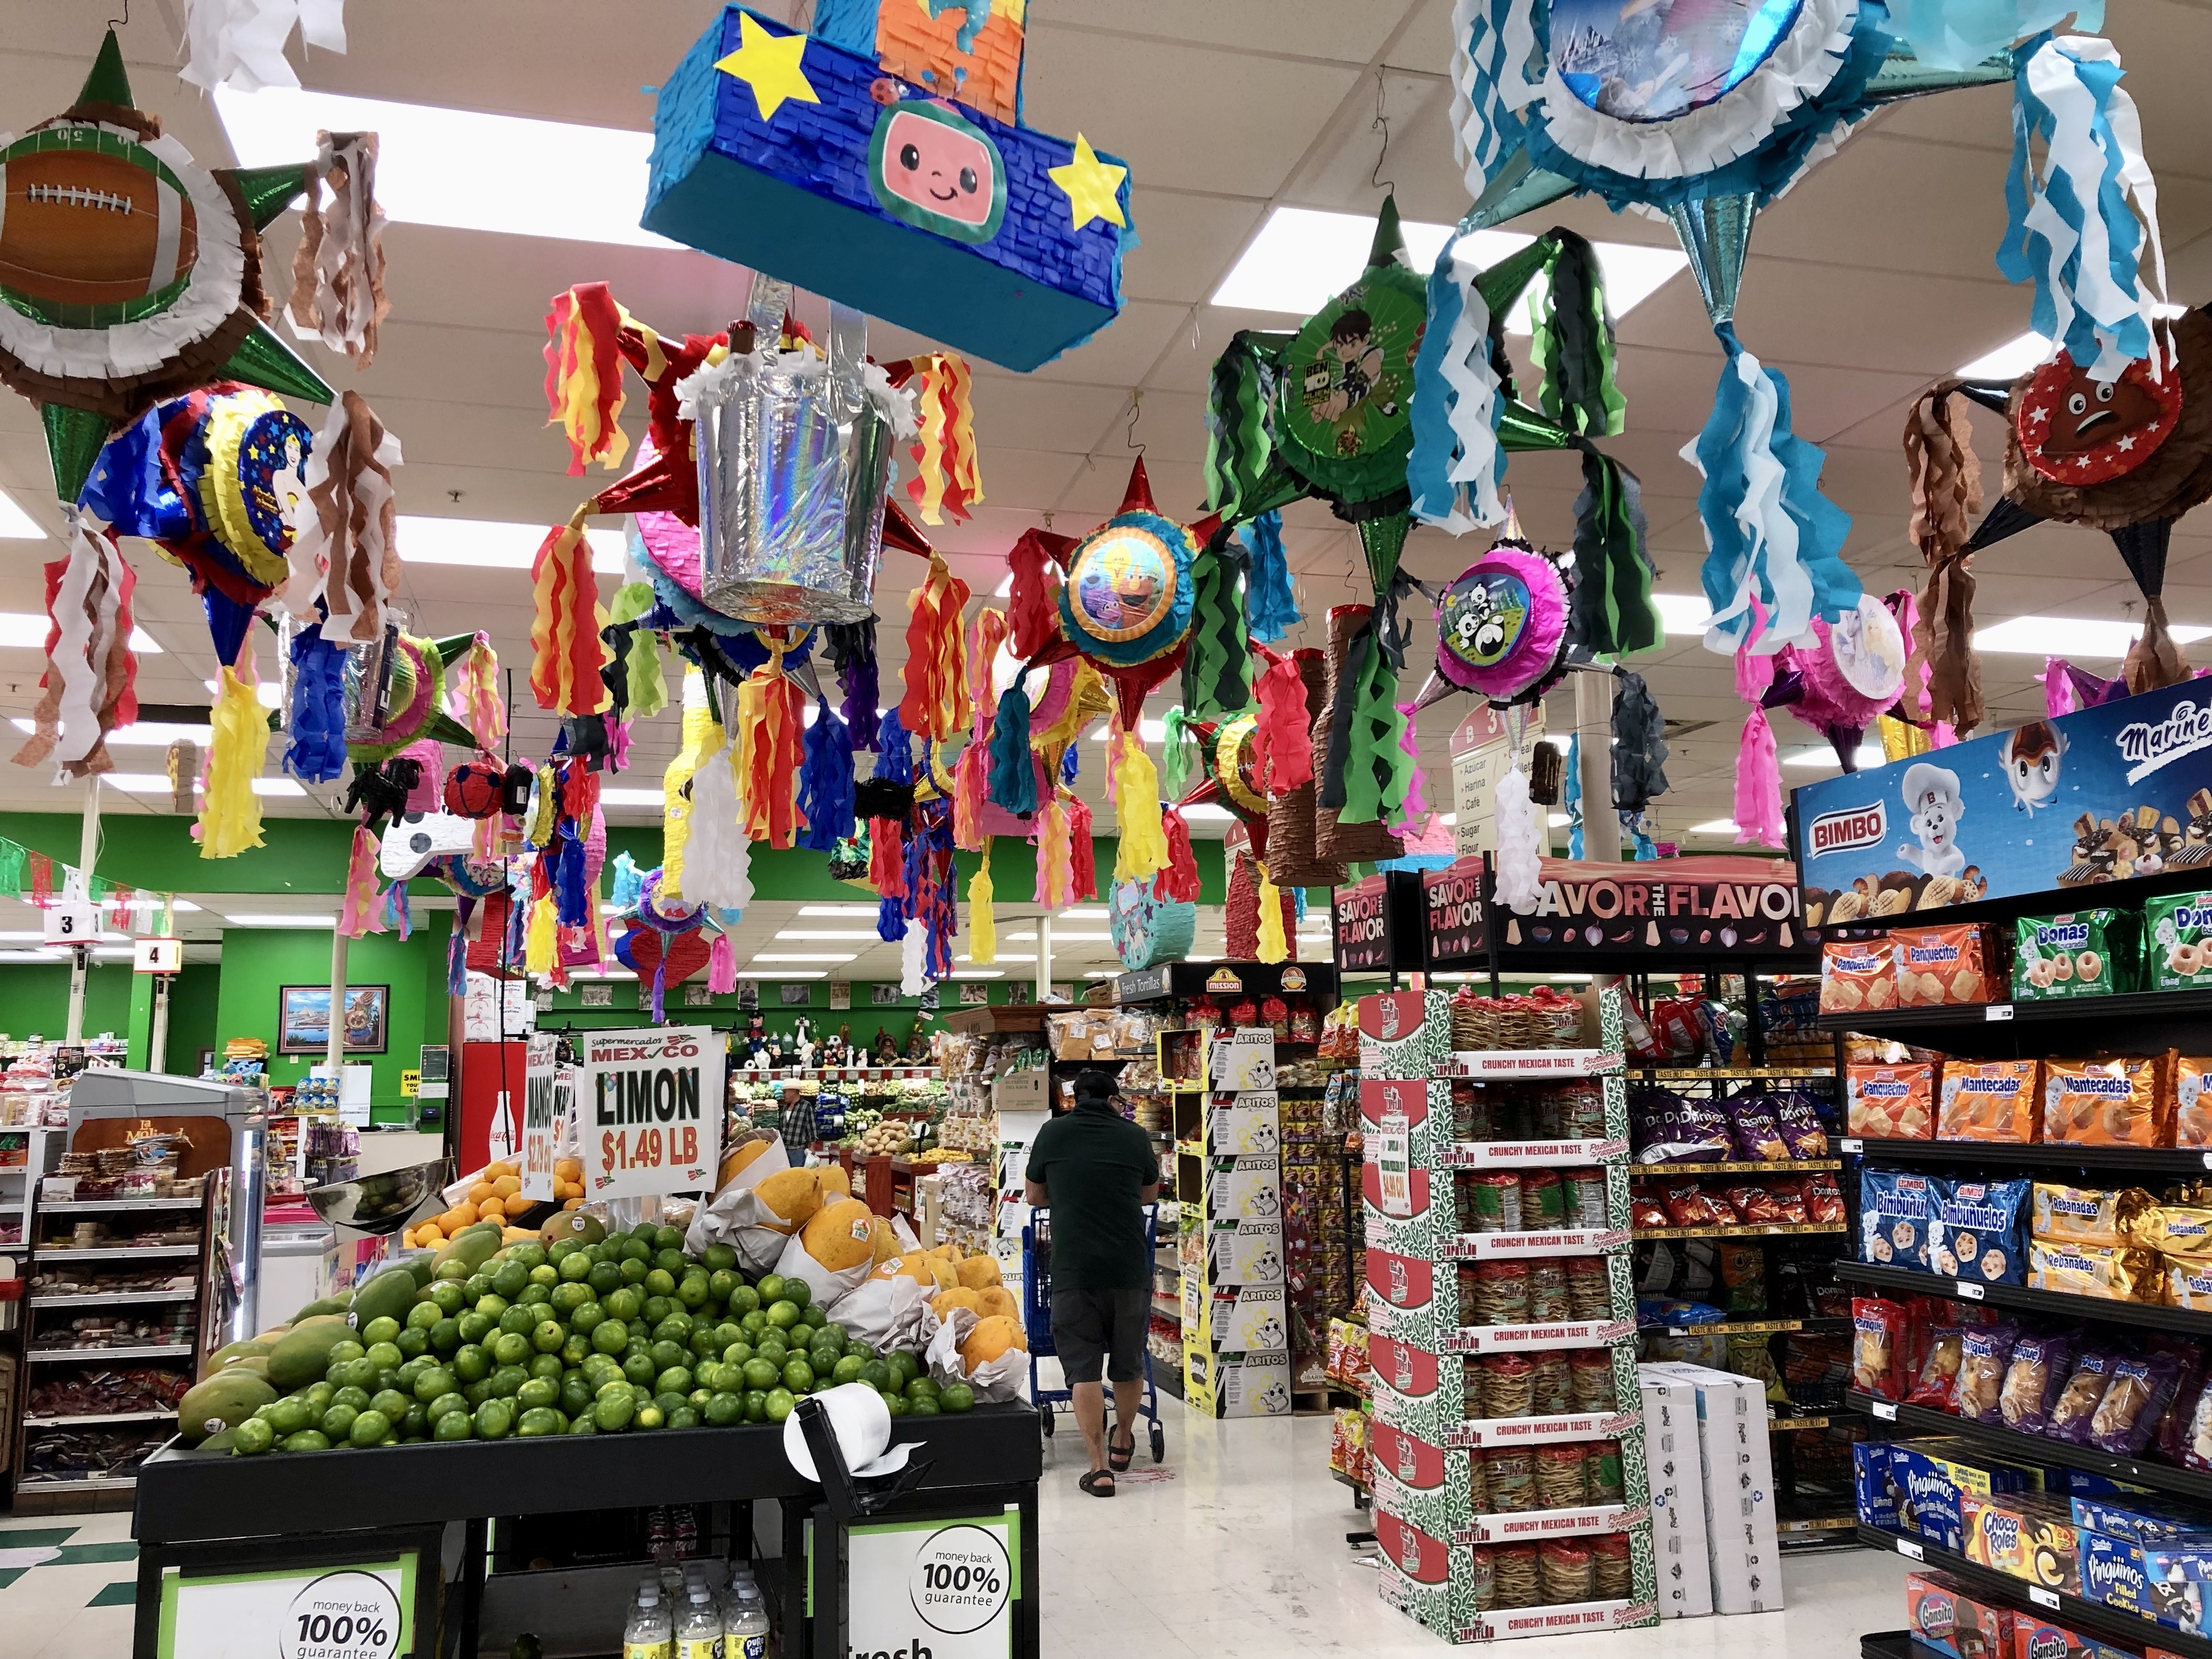 Pinatas hang from the ceiling of Supermercados Mexico.